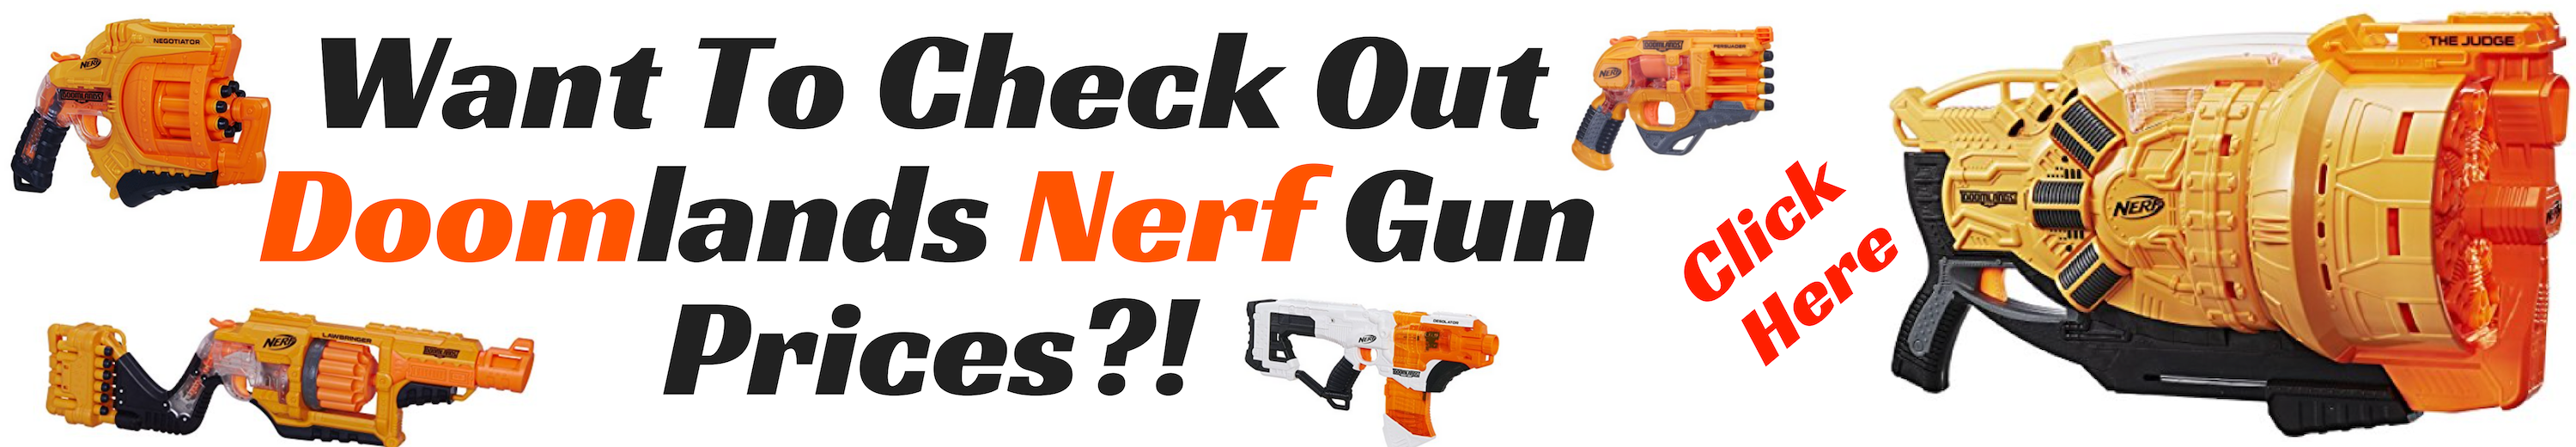 Want To Check Out Doomlands Nerf Gun Prices